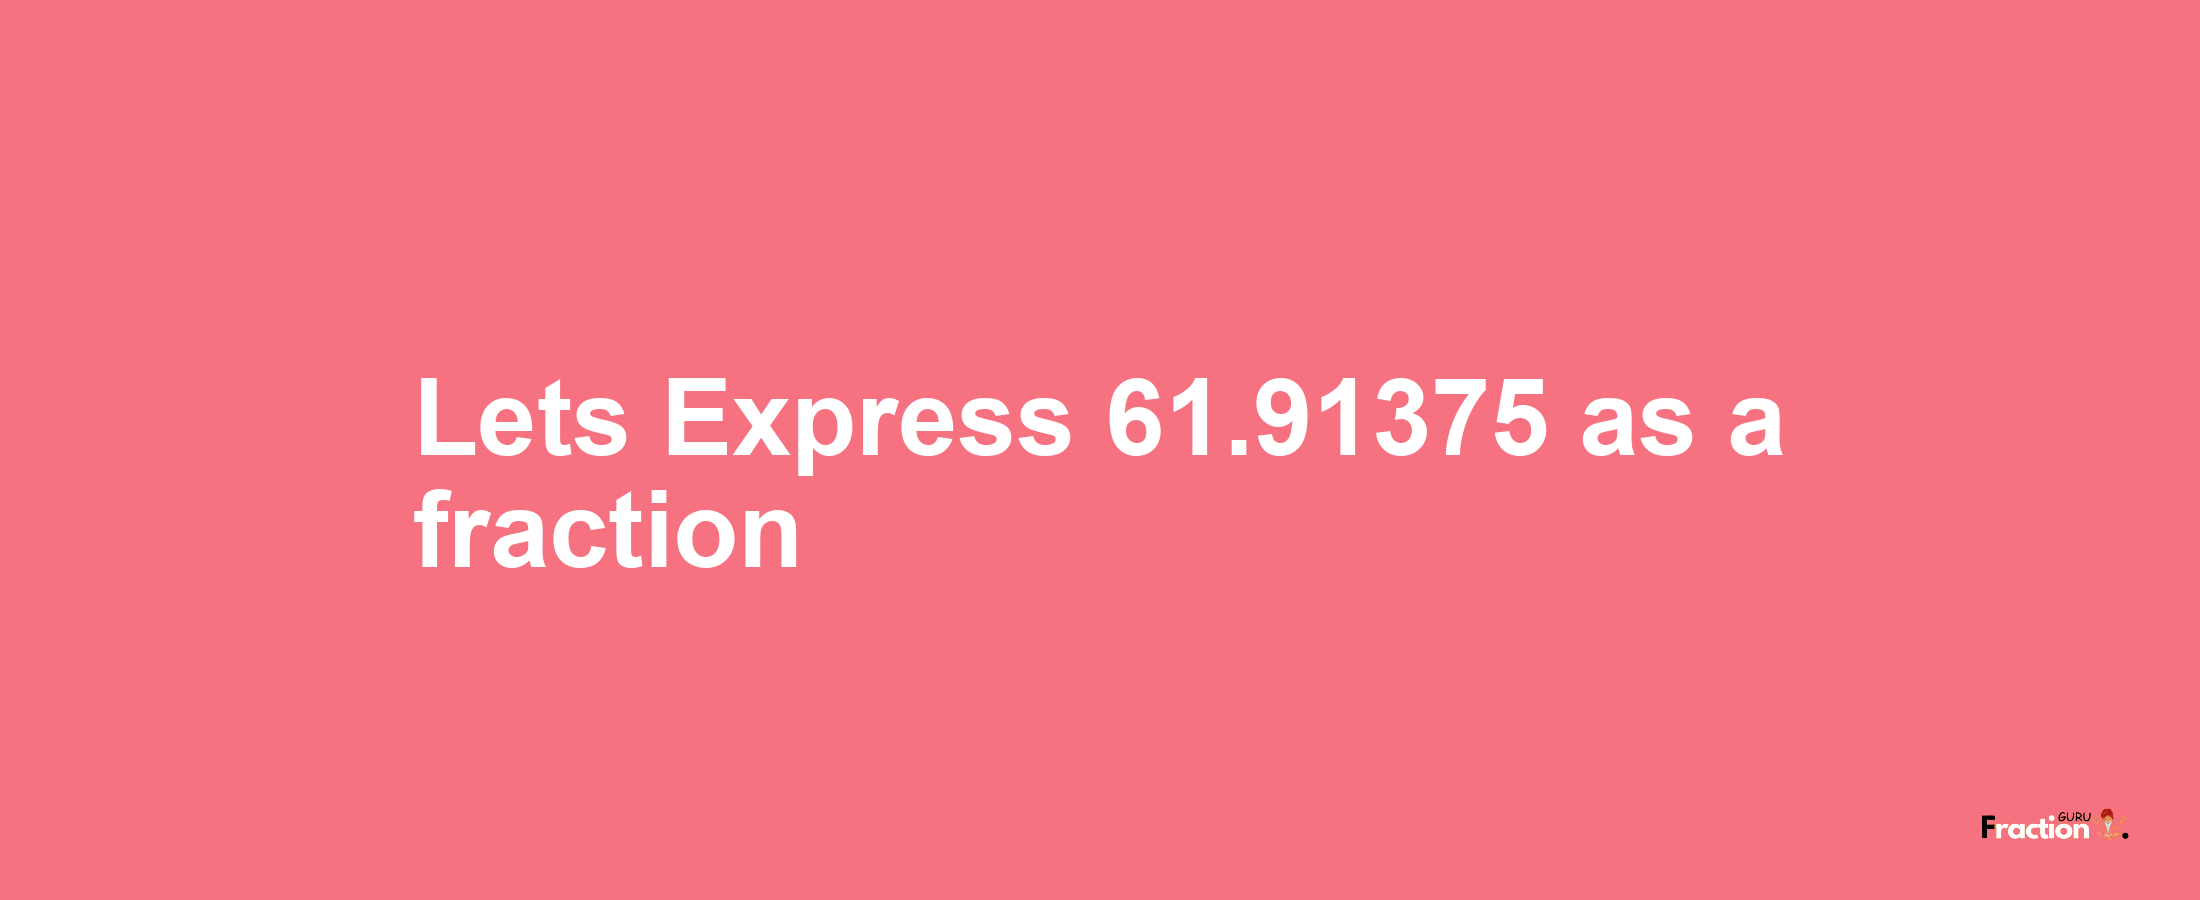 Lets Express 61.91375 as afraction